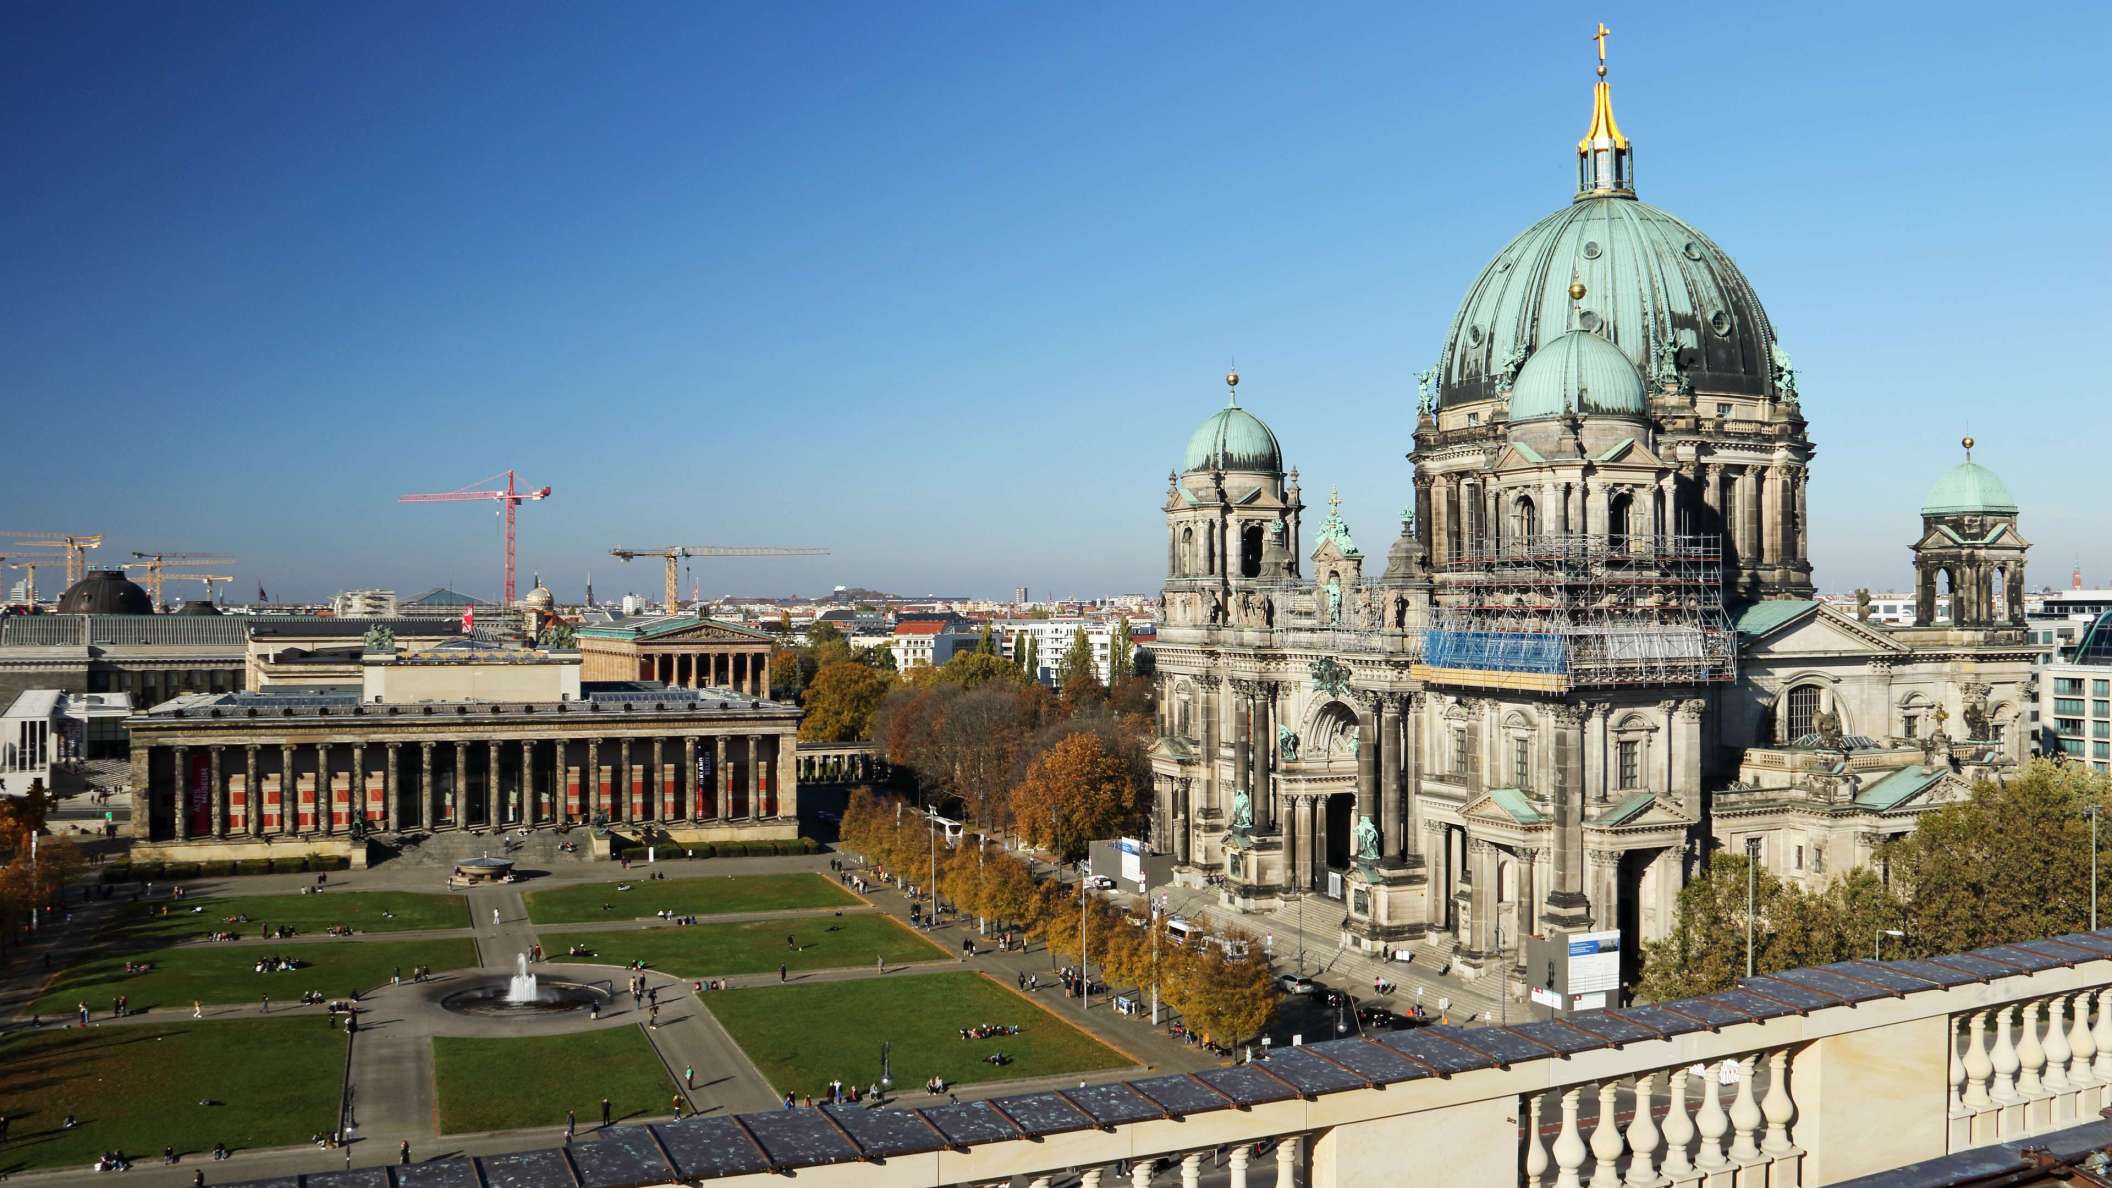 Berlin | Lustgarten with Altes Museum and Dom